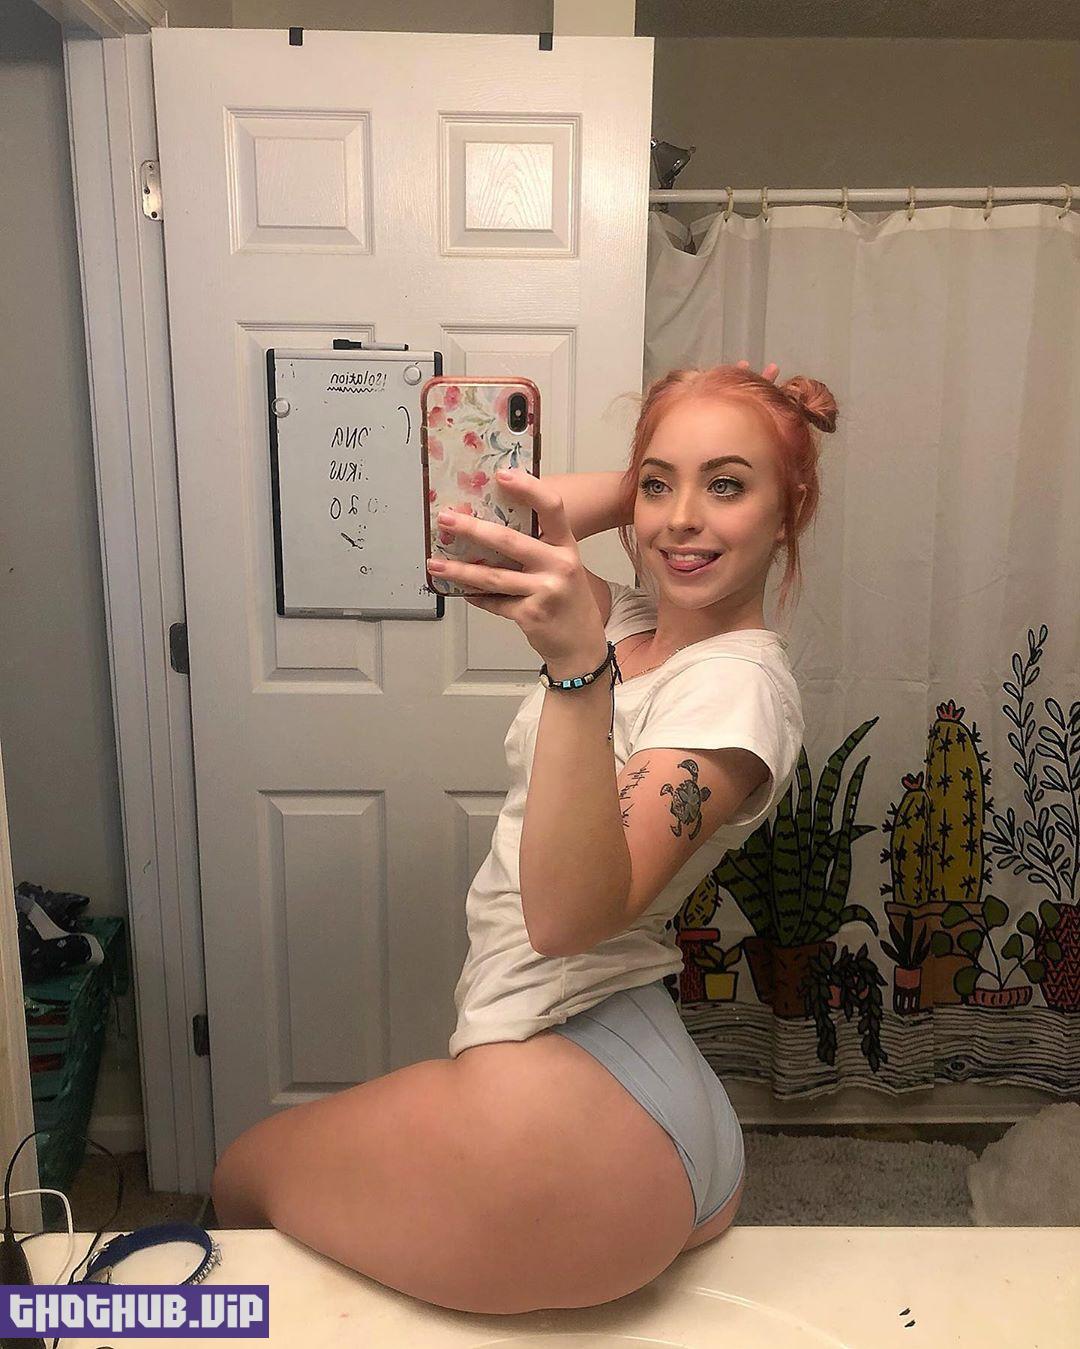 1661569274 520 Therealdariqueen %E2%80%93 Cute Teen With Big Butt